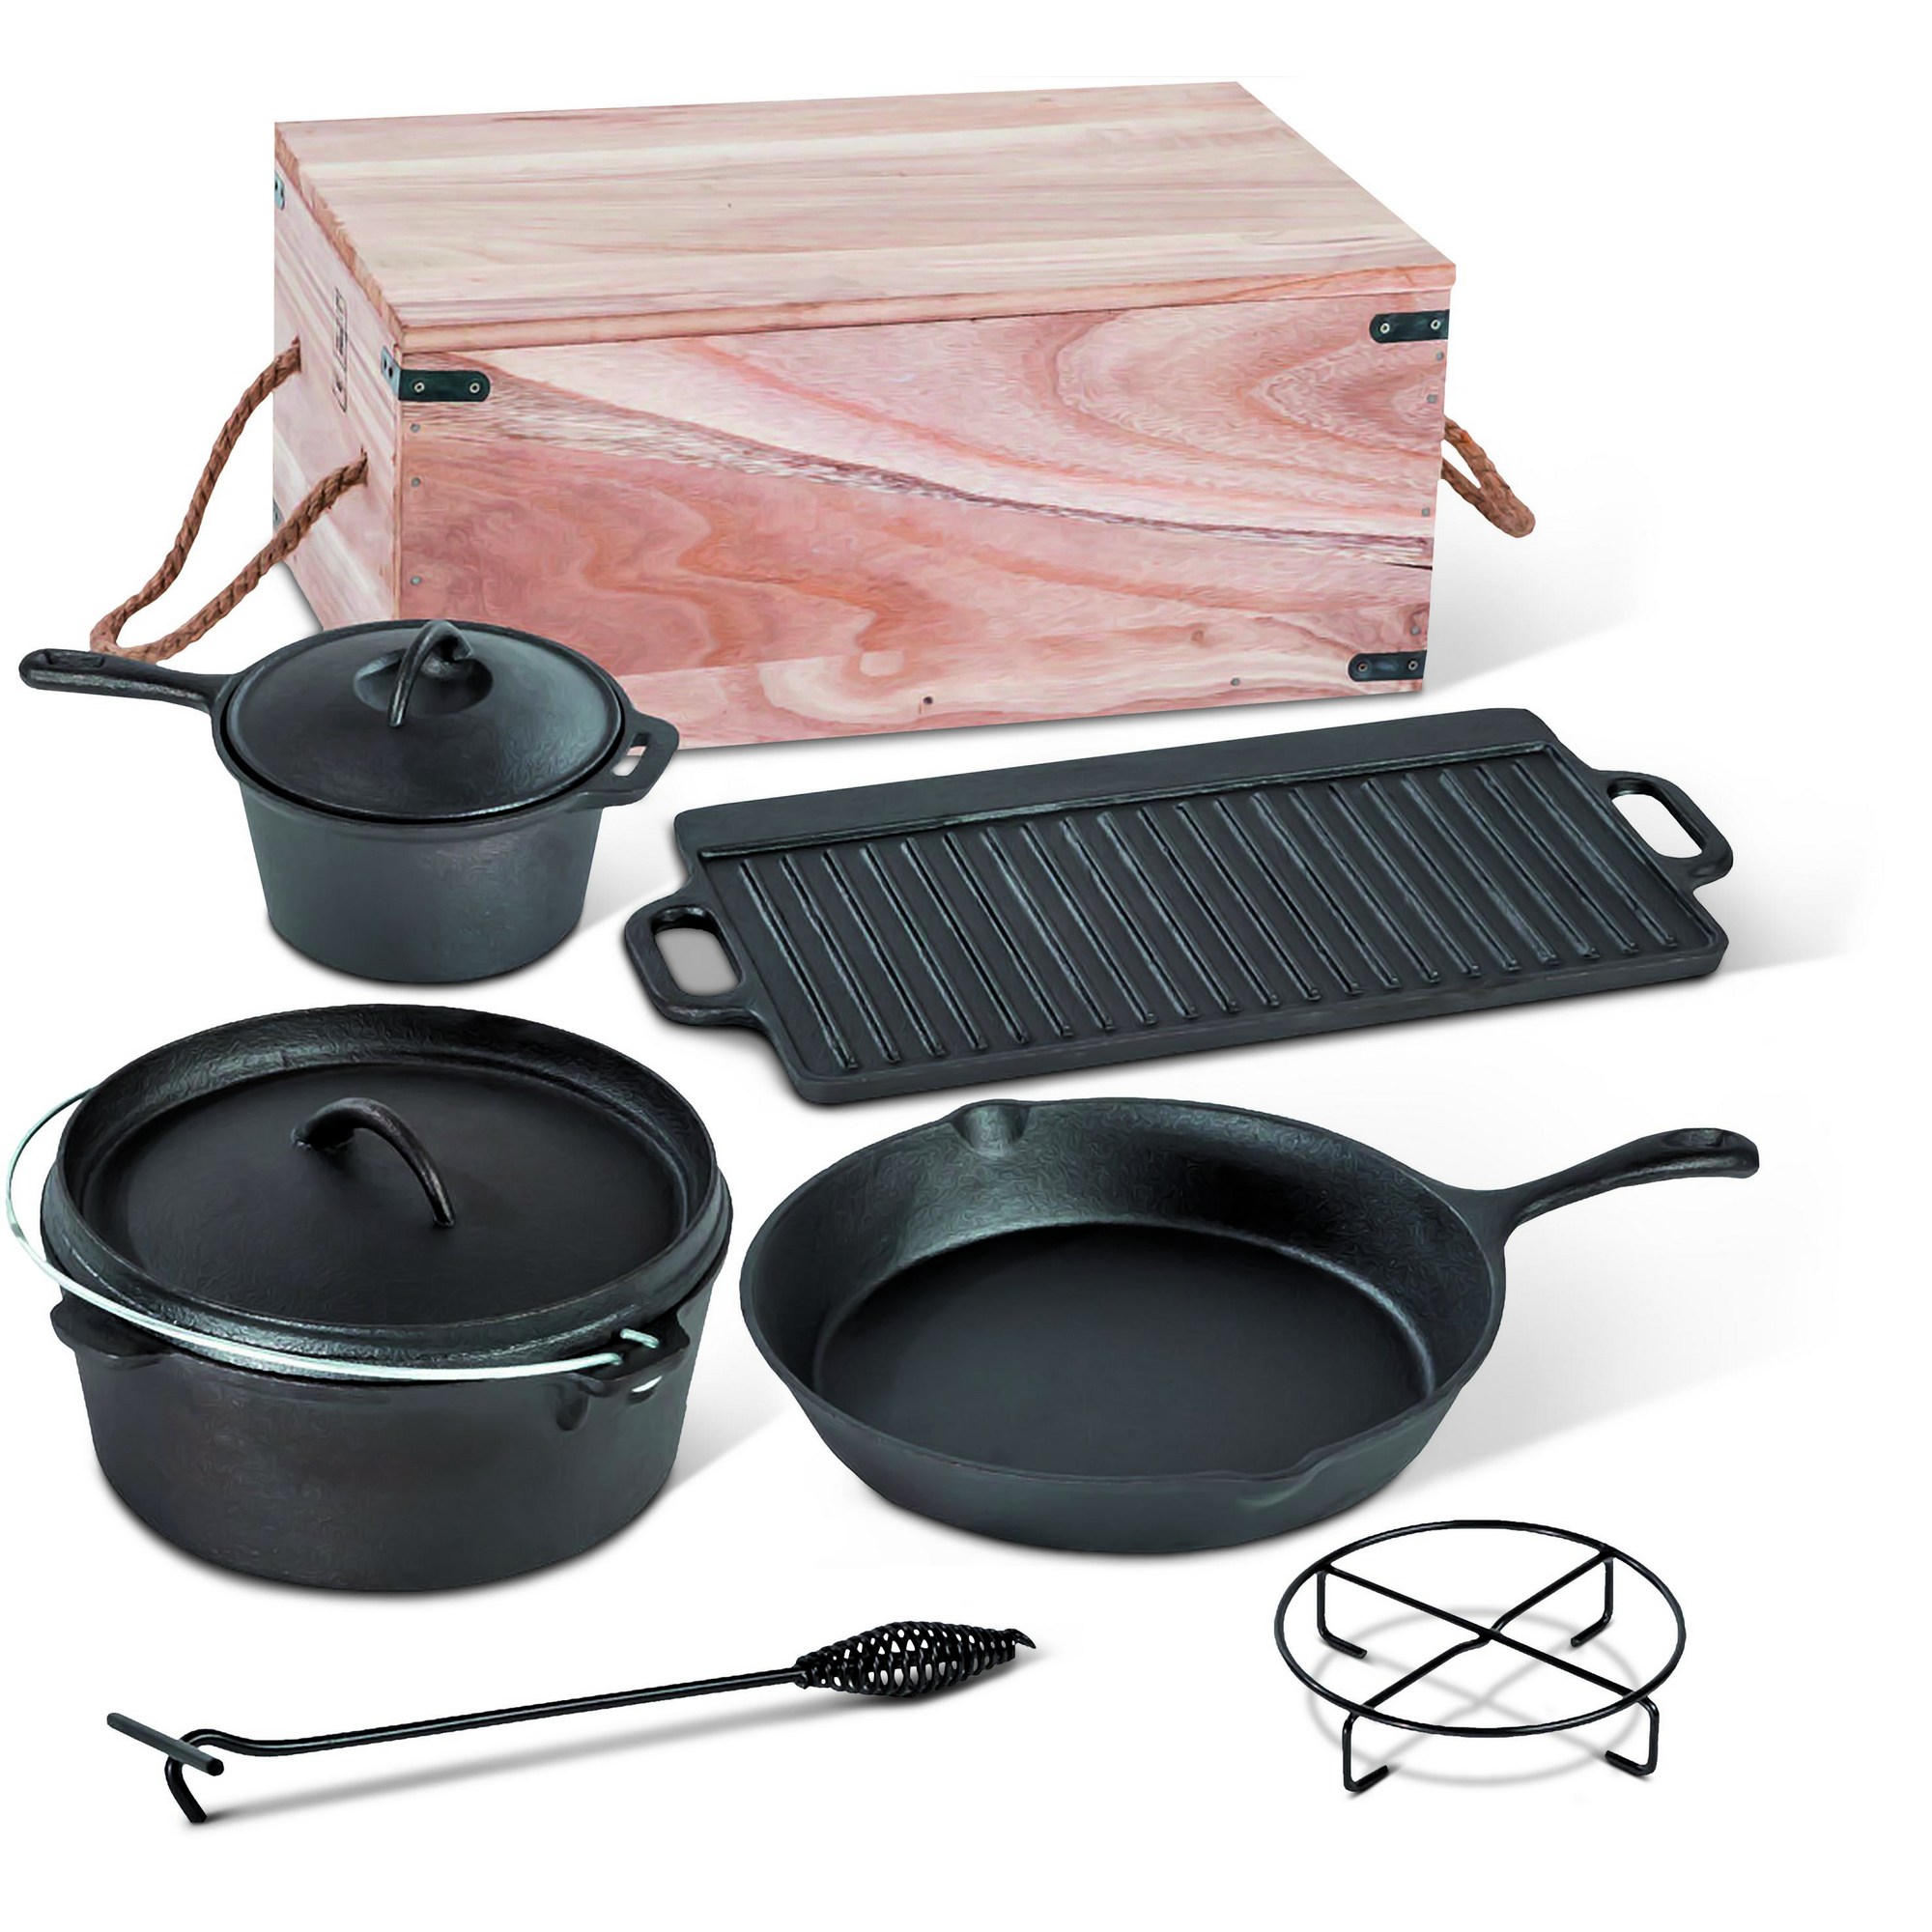 Dutch-Oven-Set Gusseisen, 7-teilig + product picture